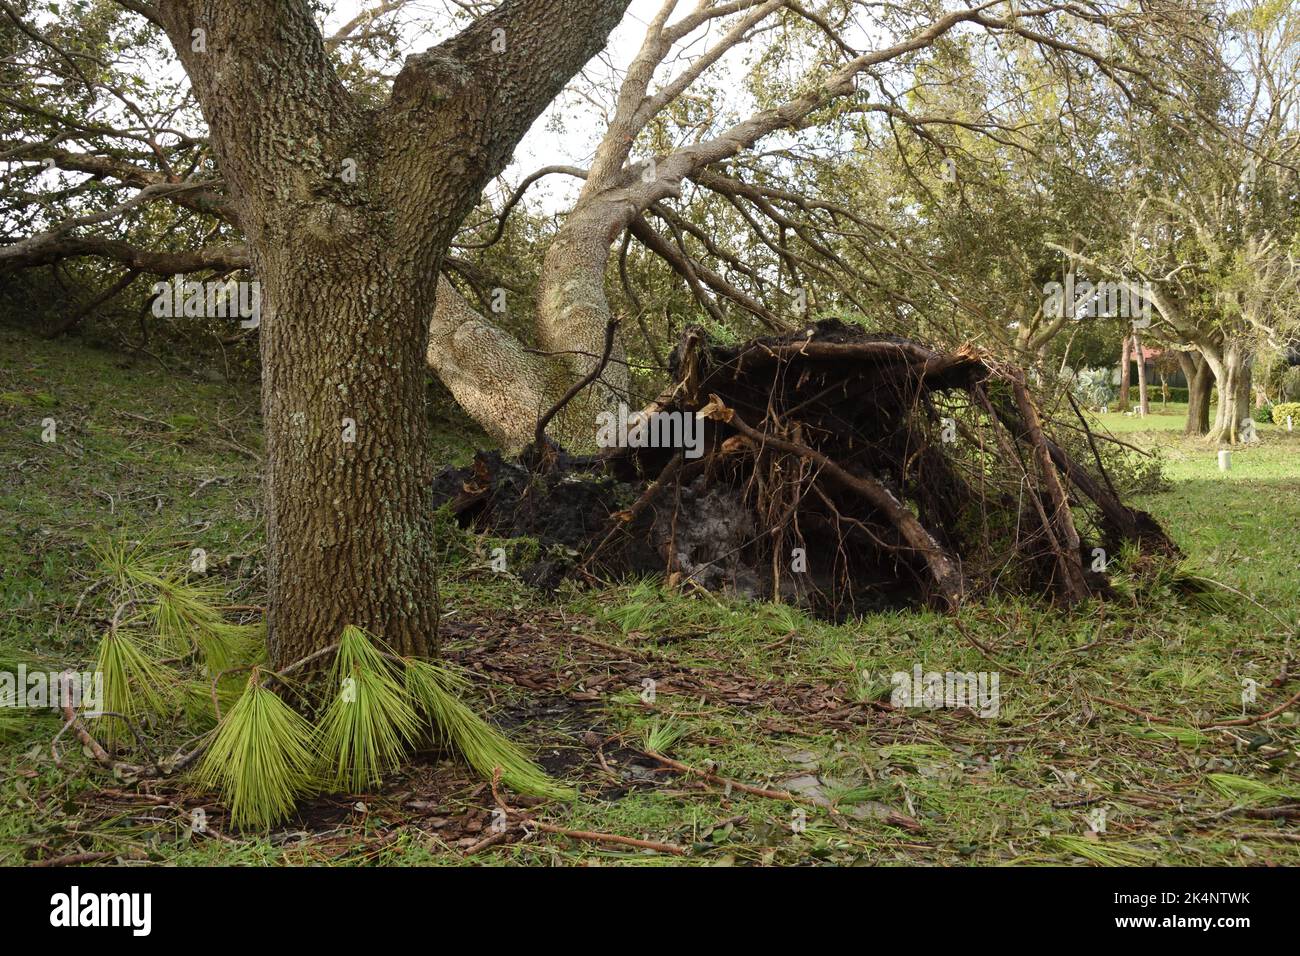 The aftermath of hurricane Ian, category 4, hitting southwest Florida on Sept 28, 2022. Large oak tree was uprooted by the gusty windstorm. Stock Photo